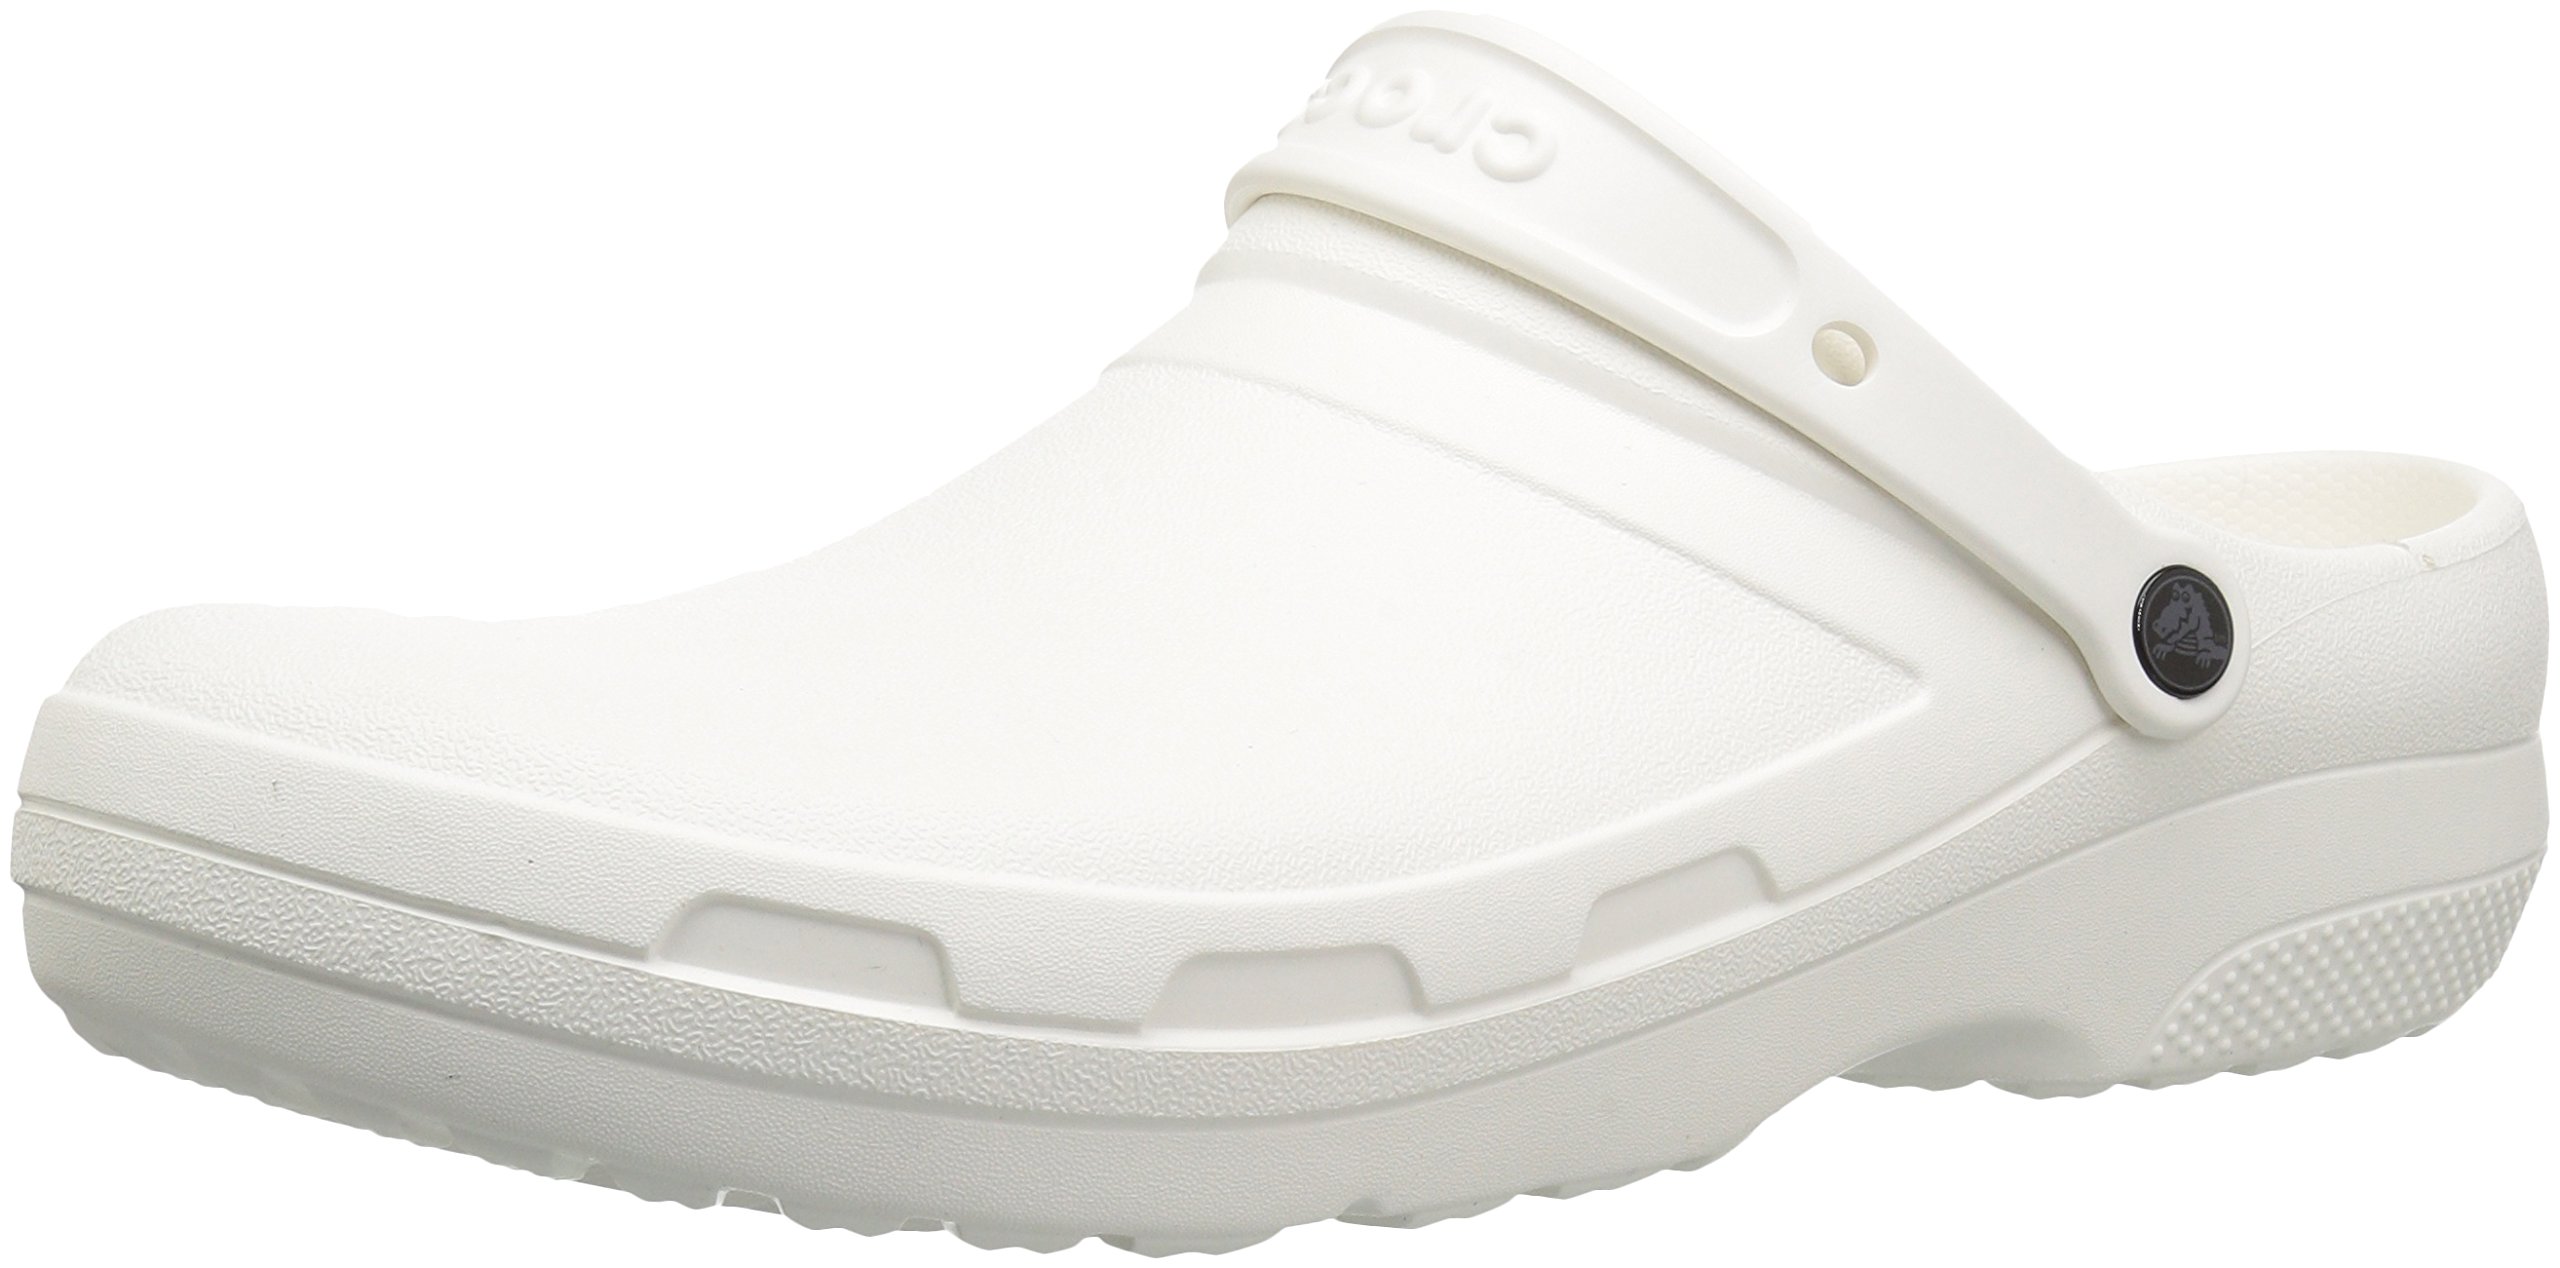 Crocs Specialist II Clog Work Shoes (White)